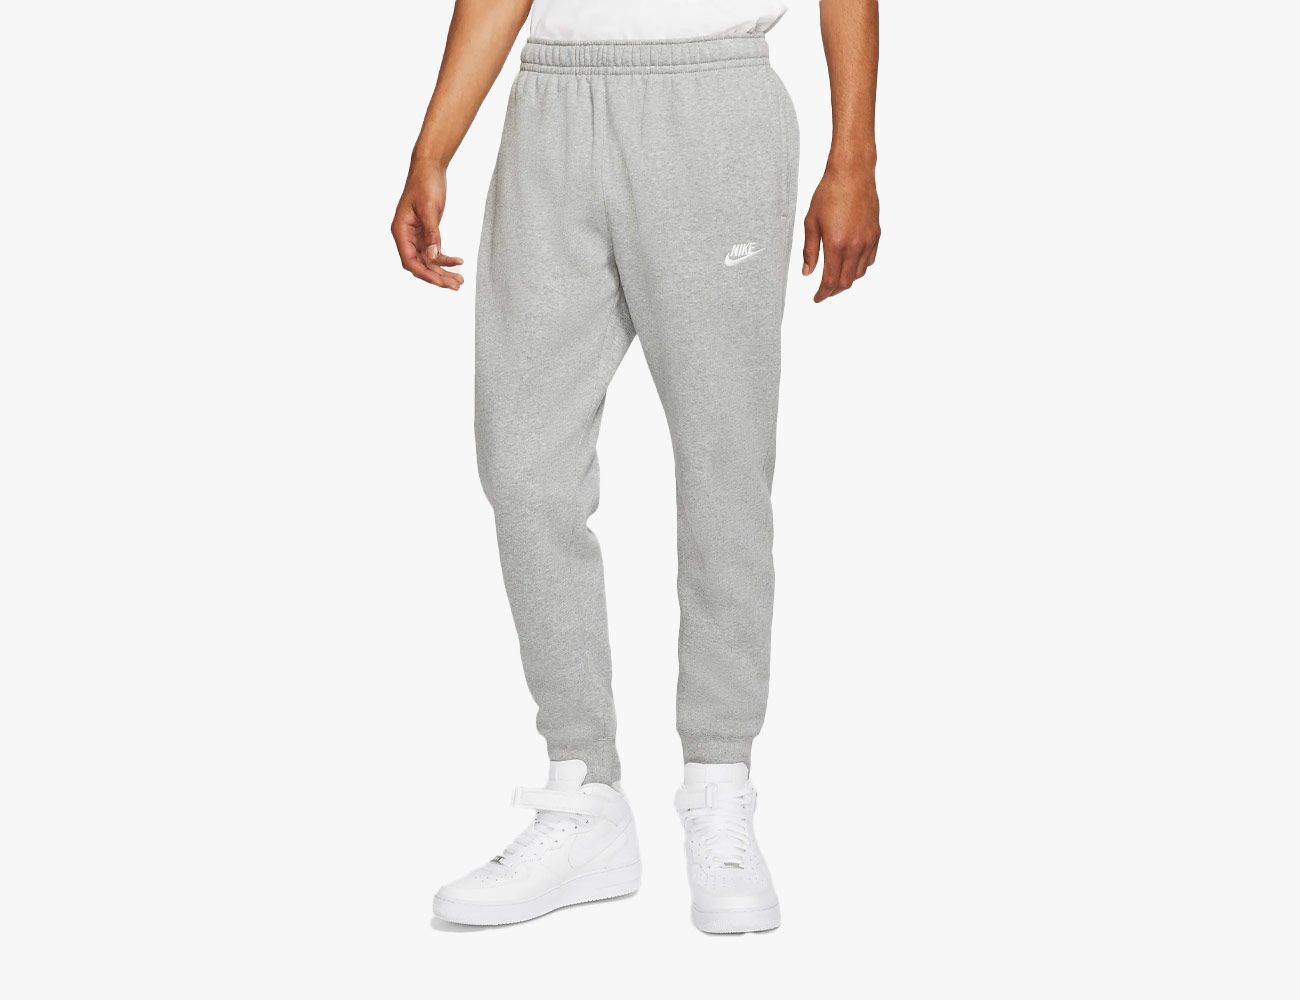 Tether filter Klappe The Best Sweatpants to Wear Everywhere